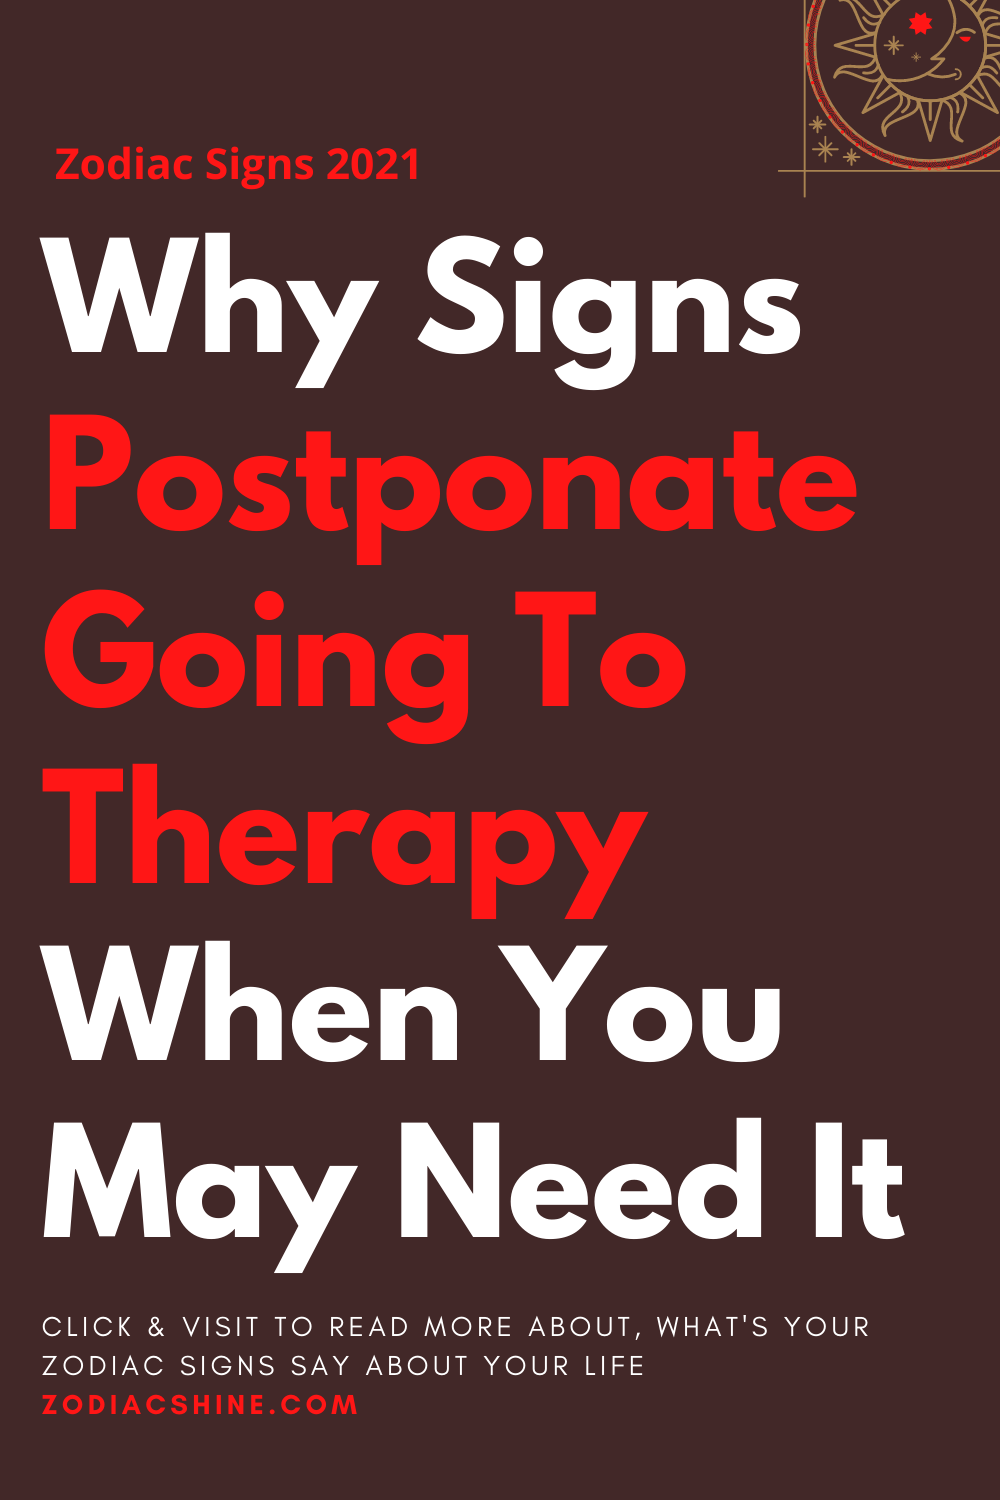 Why Signs Postponate Going To Therapy When You May Need It